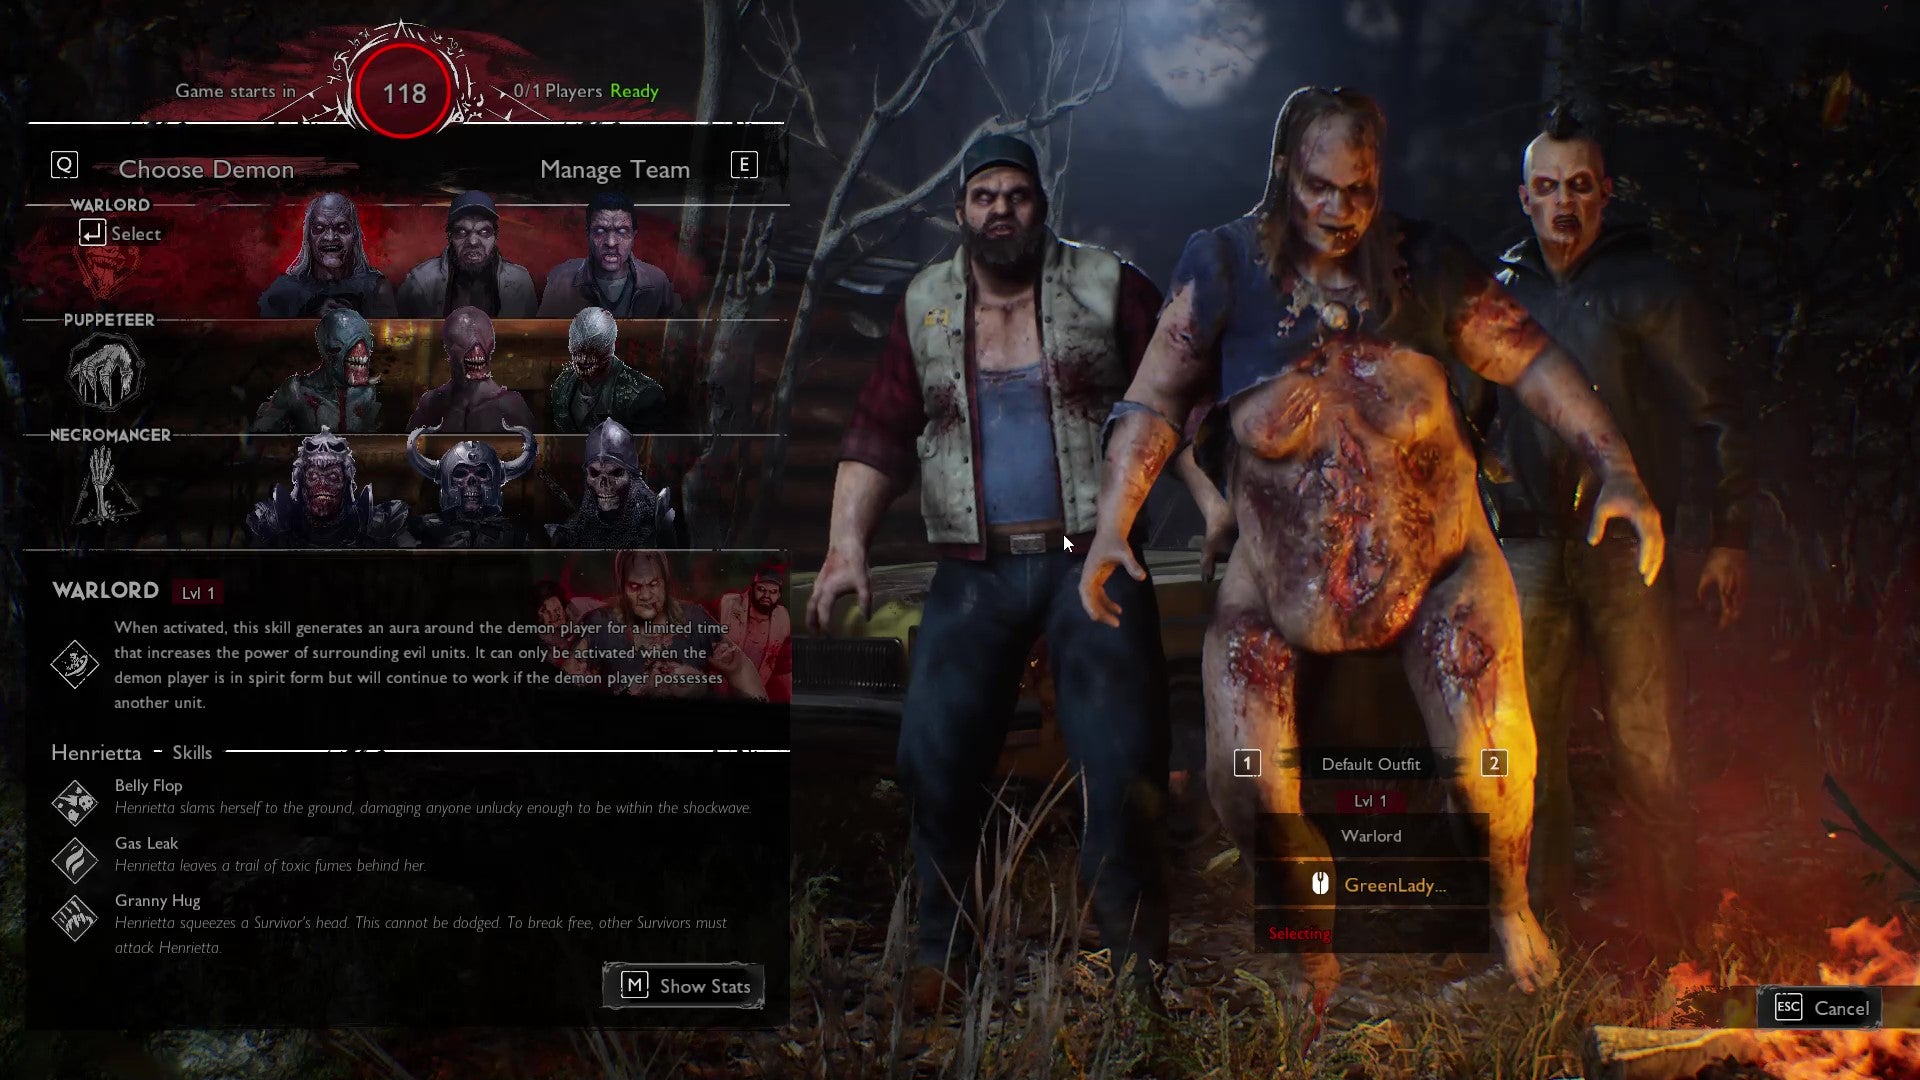 The player selection screen from Evil Dead: The Game, with the Warlord selected by a Demon player.